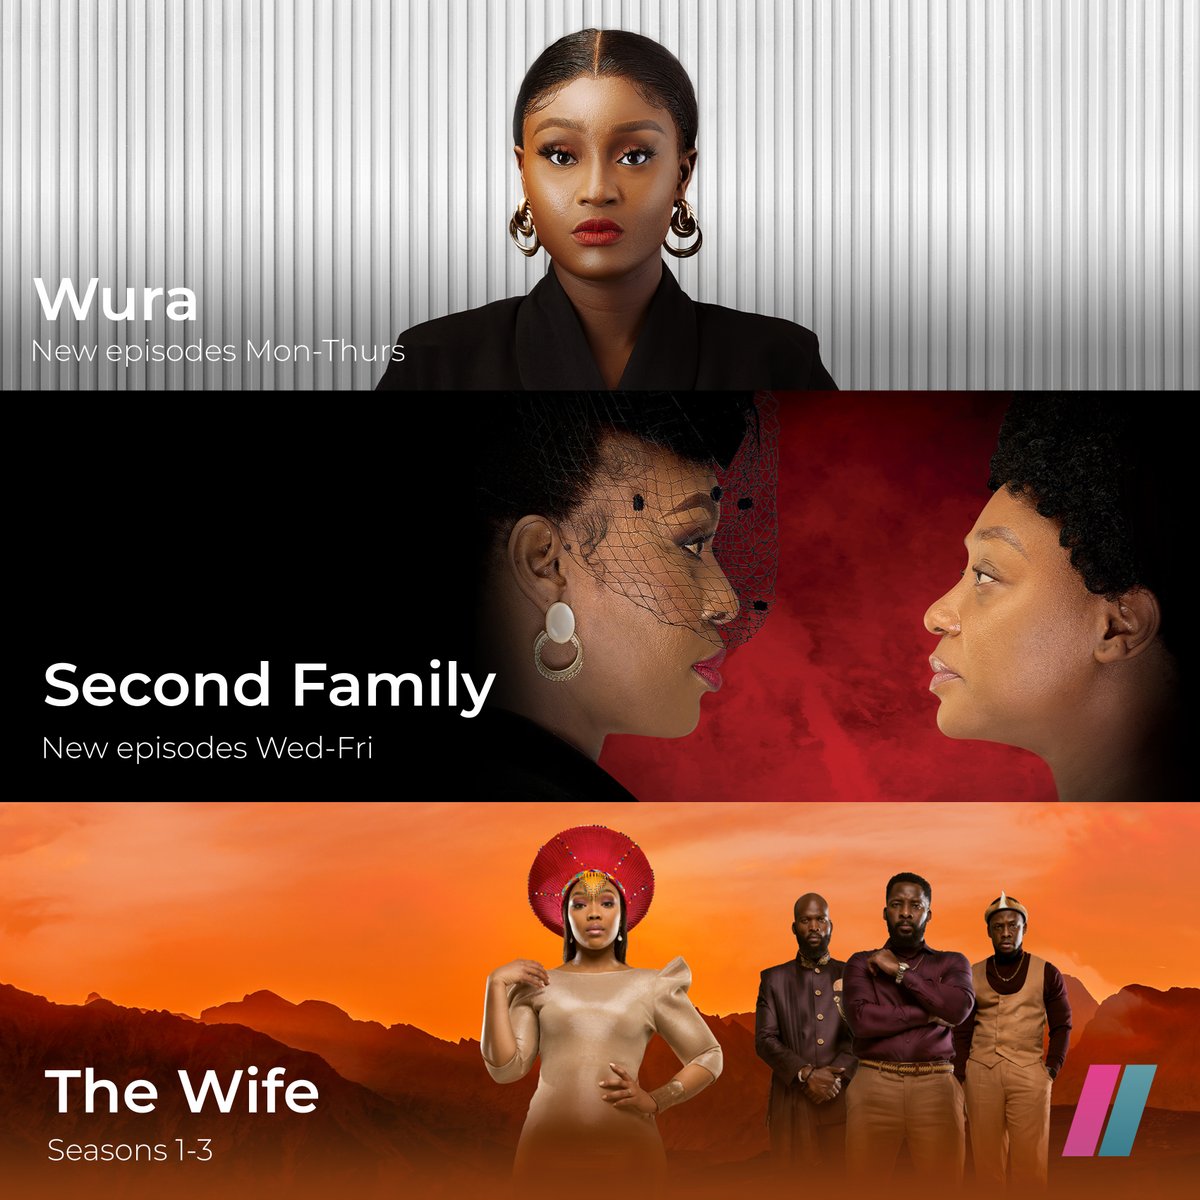 The weekend is here and it's time to binge-watch some of your fave telenovelas 💃 Catch #WuraShowmax #SecondFamilyShowmax and #TheWifeShowmax only on Showmax